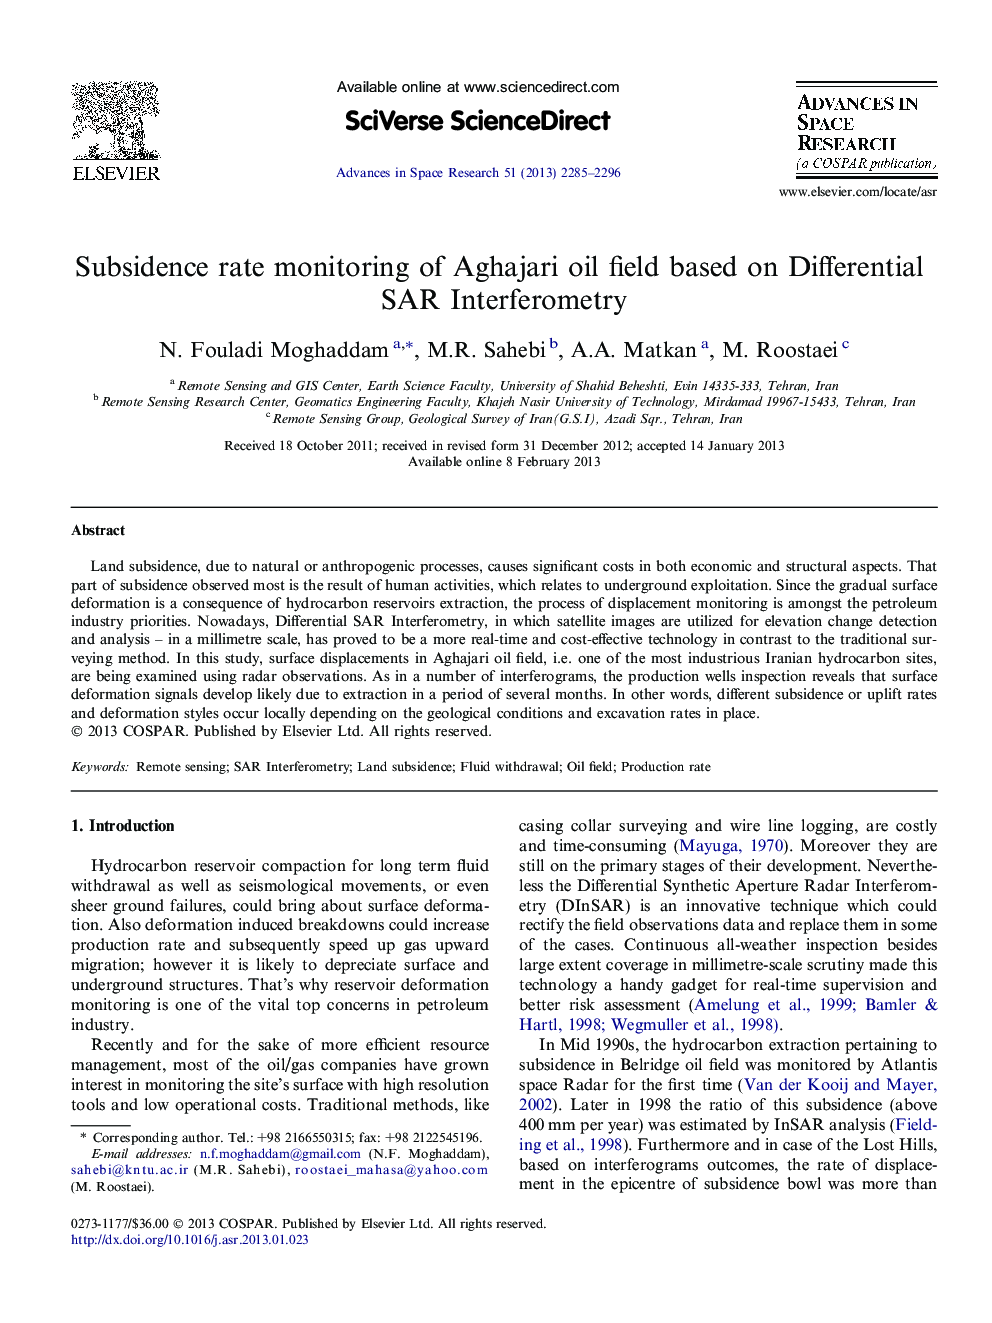 Subsidence rate monitoring of Aghajari oil field based on Differential SAR Interferometry